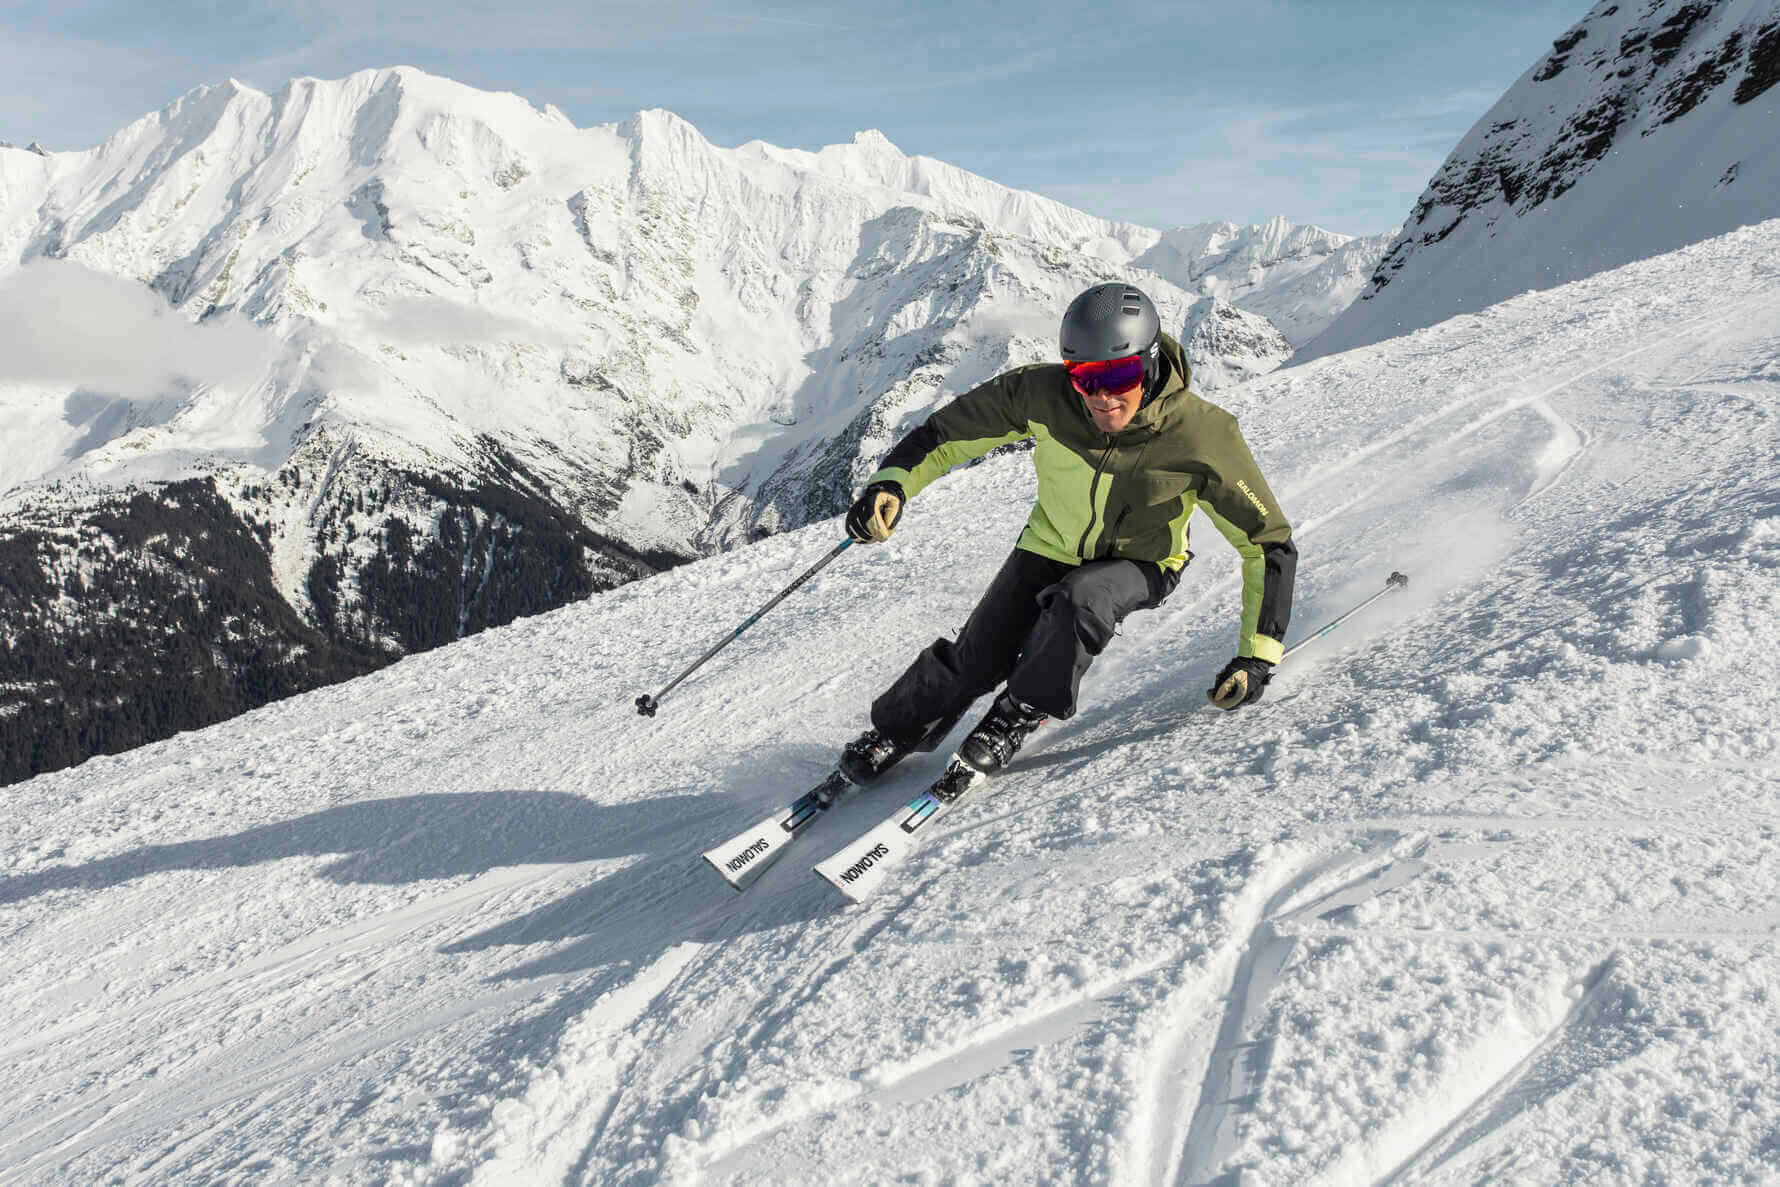 A solo skier doing a carve turn at speed